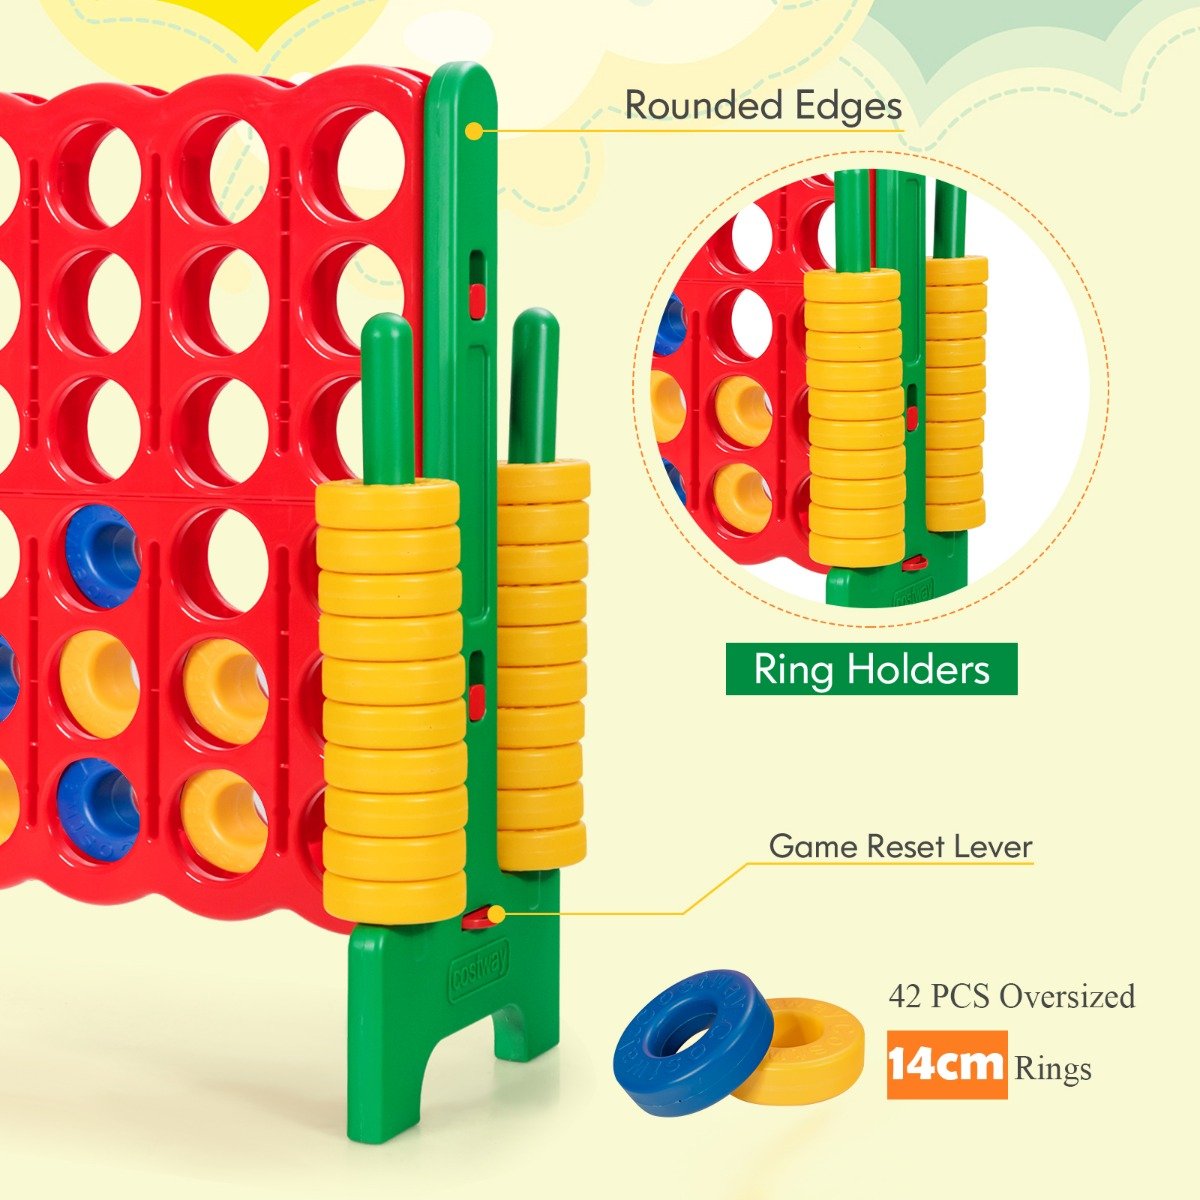 Giant Connect 4 in A Row - 42 Jumbo Rings for Fun Garden Playtime